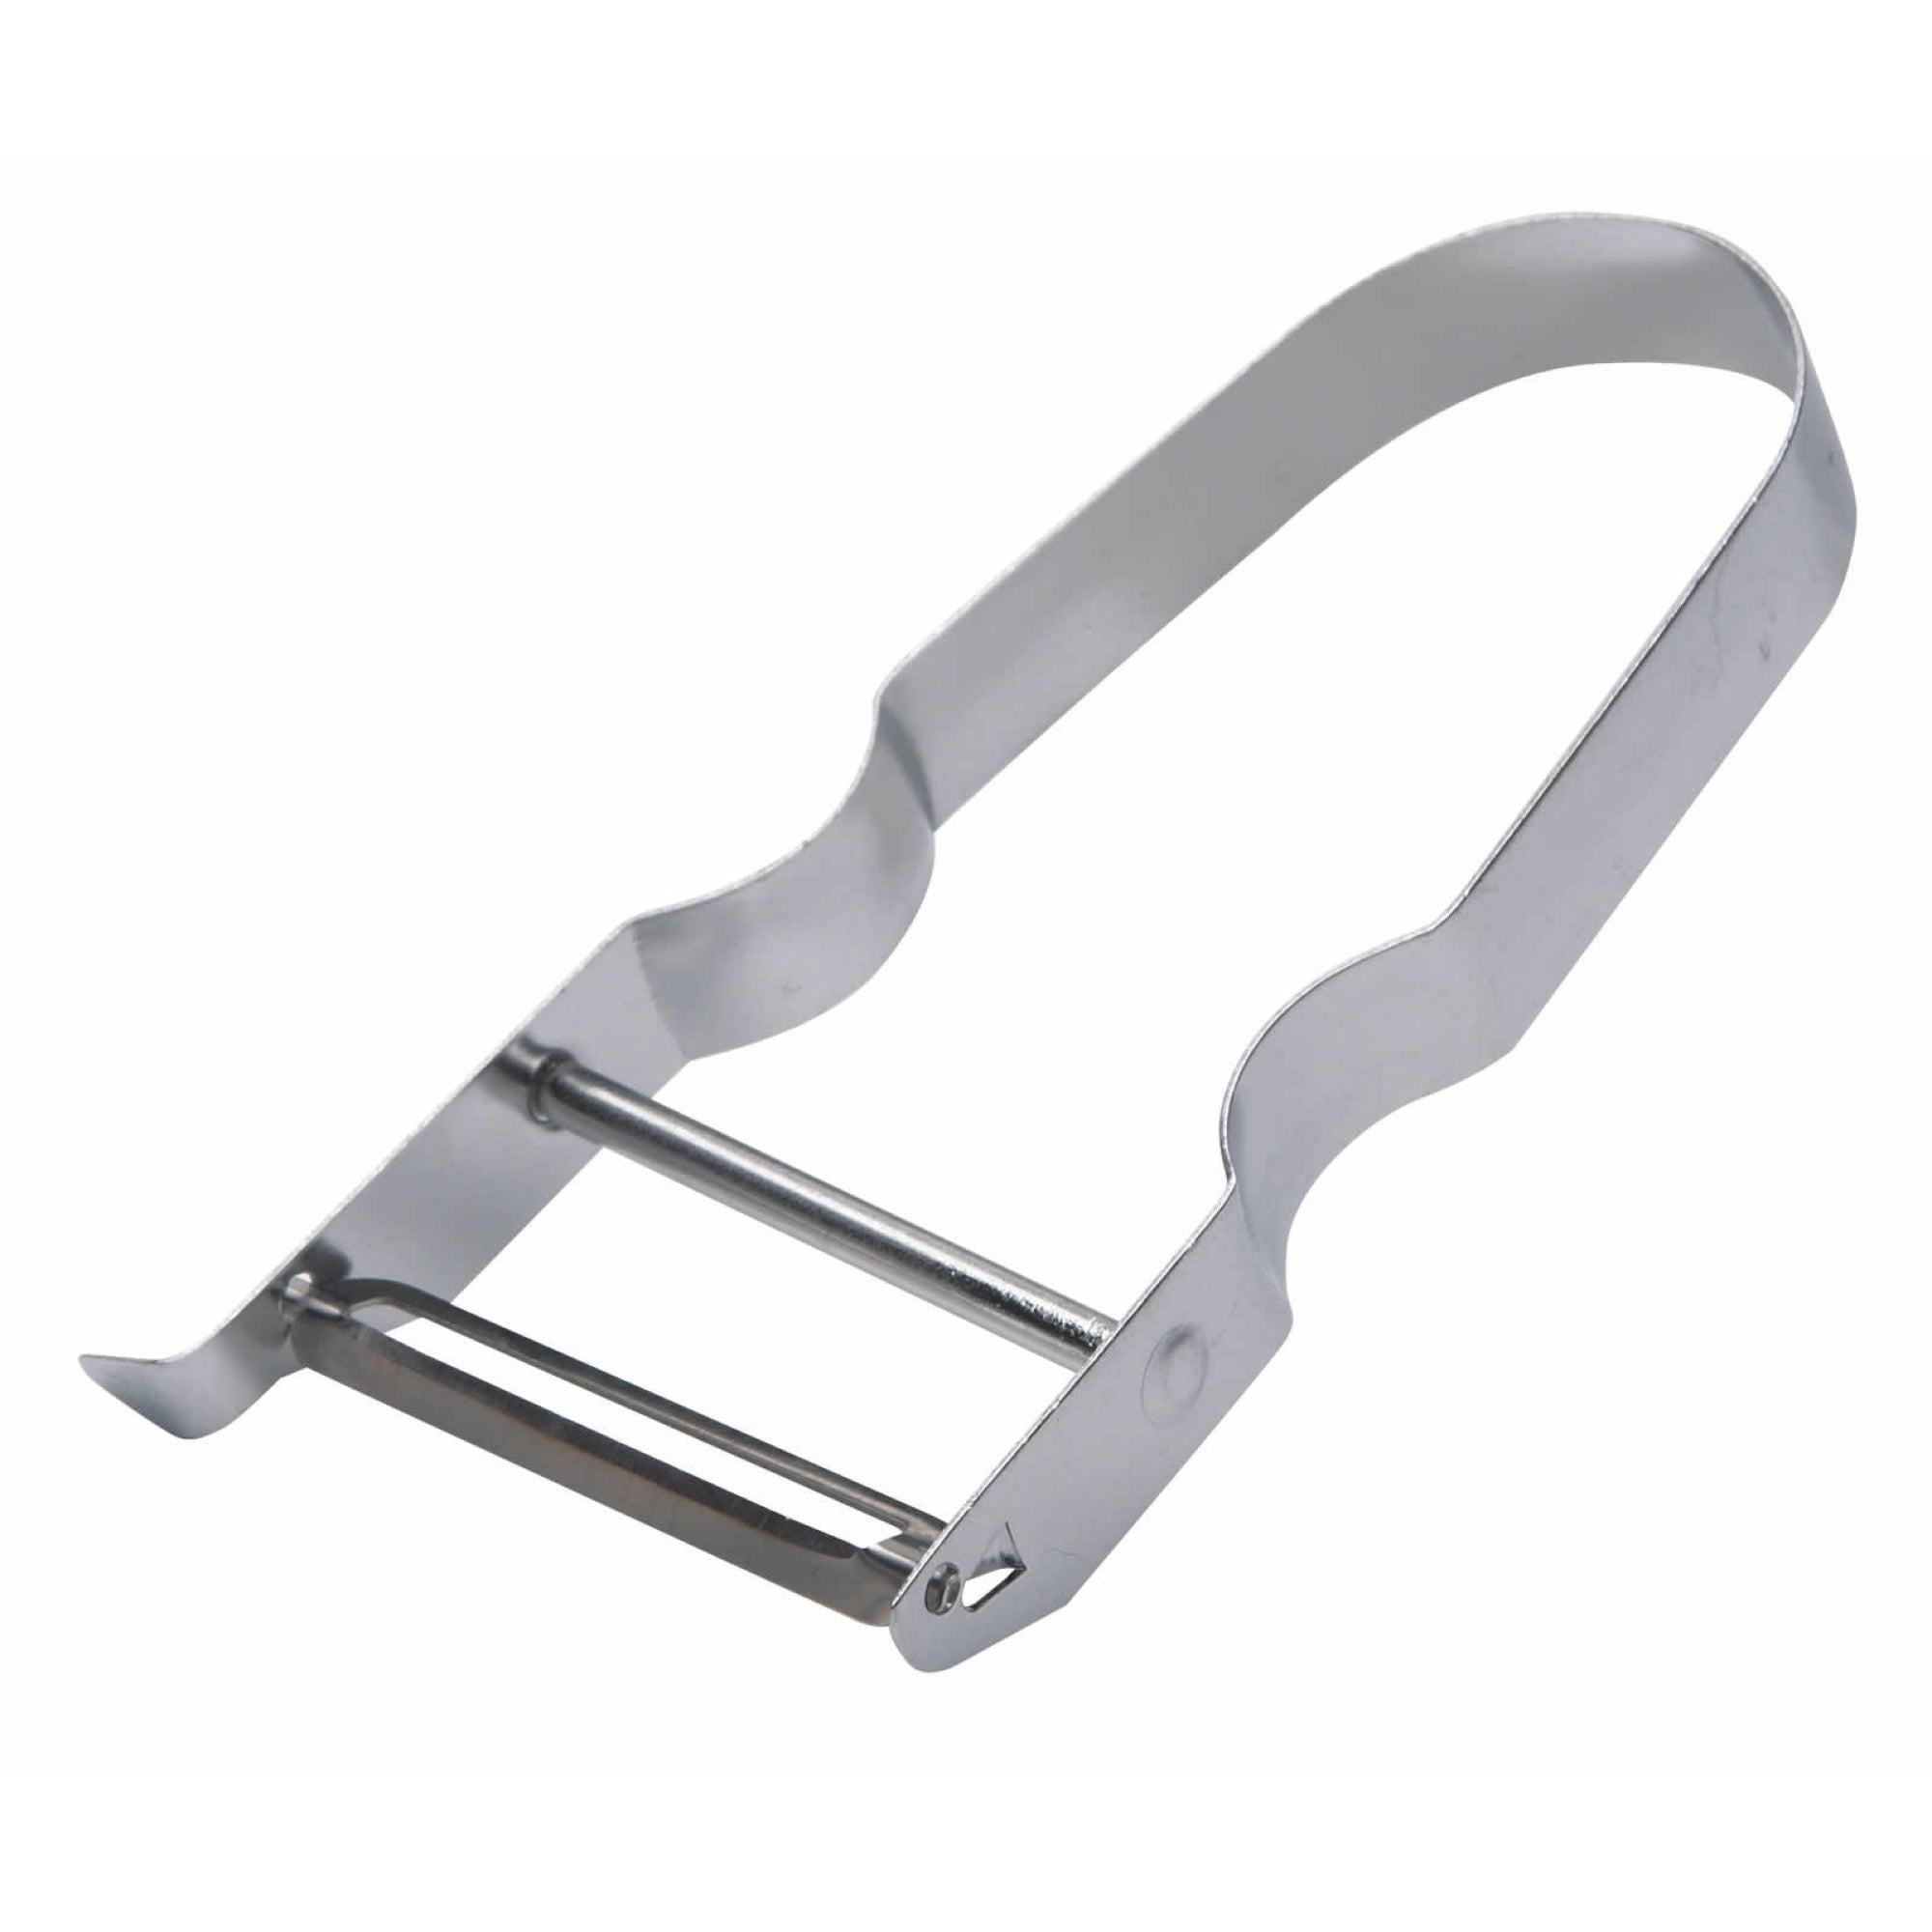 KitchenCraft Stainless Steel Safety Vegetable Peeler - The Cooks Cupboard Ltd